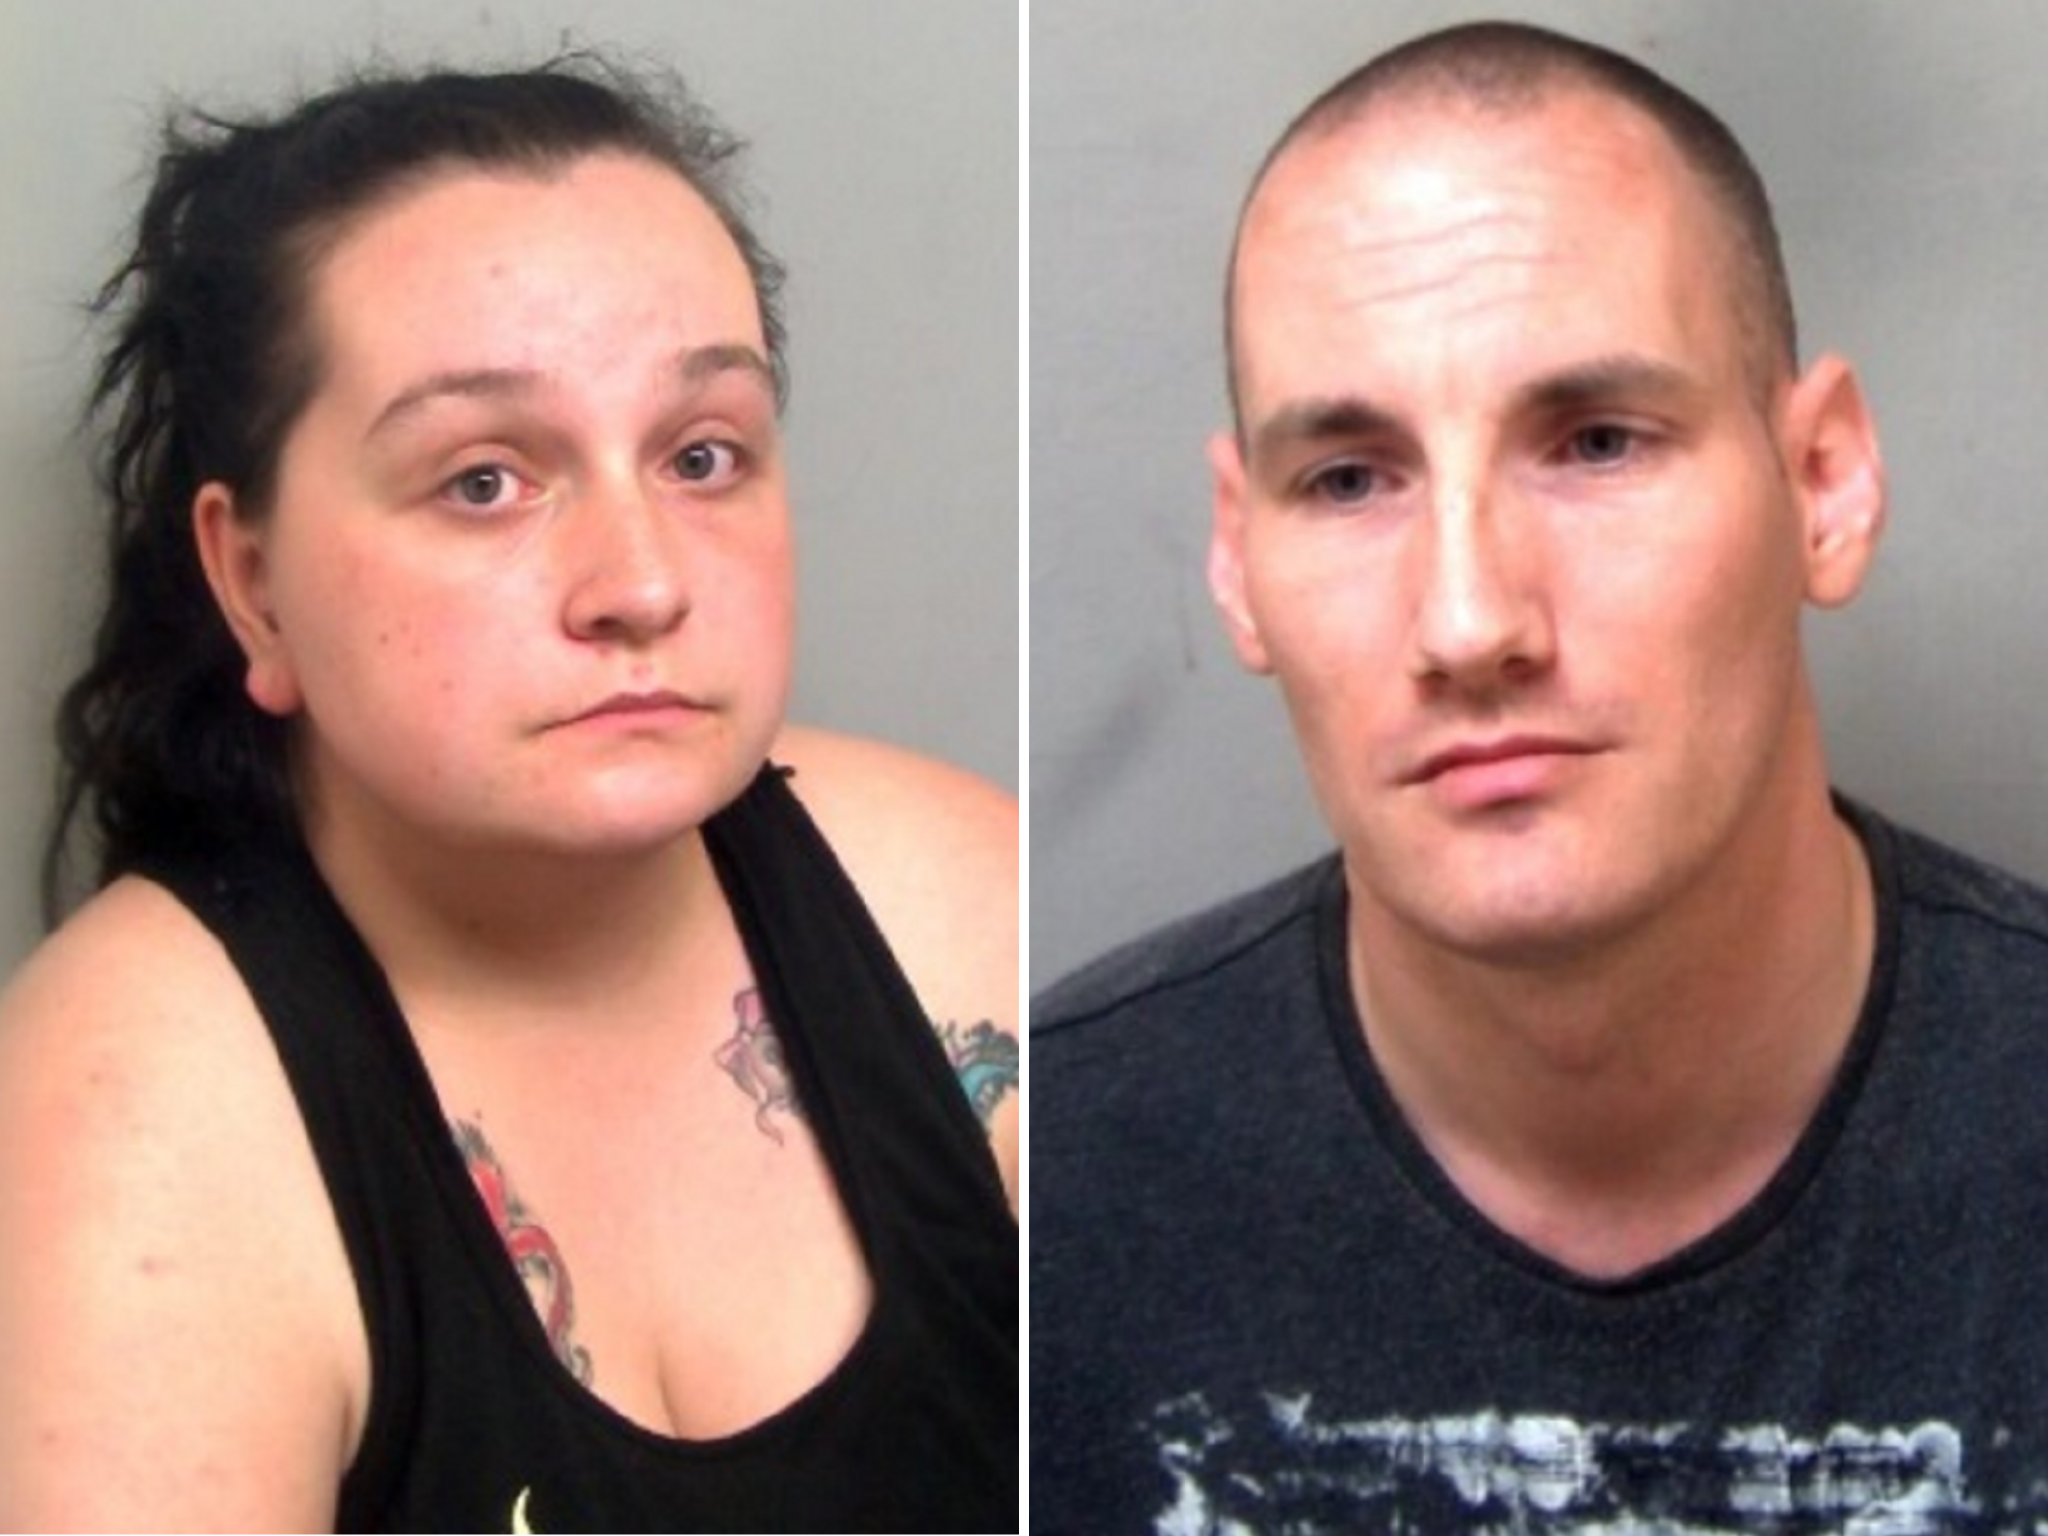 Jessica Fry and Mark Gable, from Colchester, were jailed for a total of 21 years on 13 December 2019 after admitting a string of child sex abuse offences.